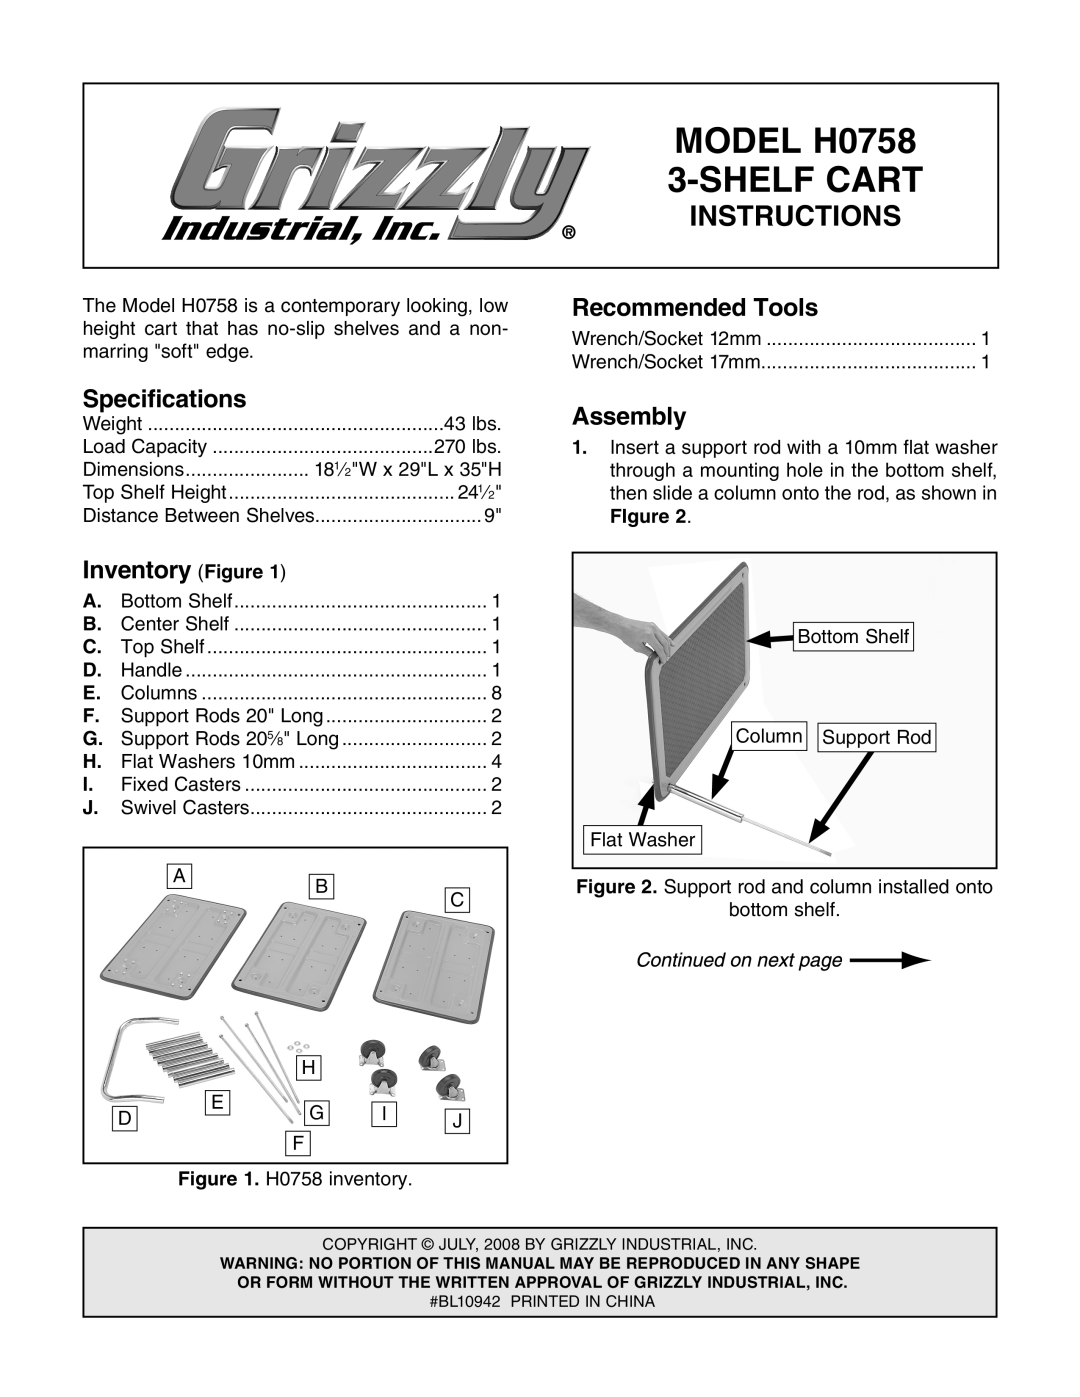 Grizzly specifications MODEL H0758, Shelf Cart, Instructions, Recommended Tools, Specifications, Inventory Figure 